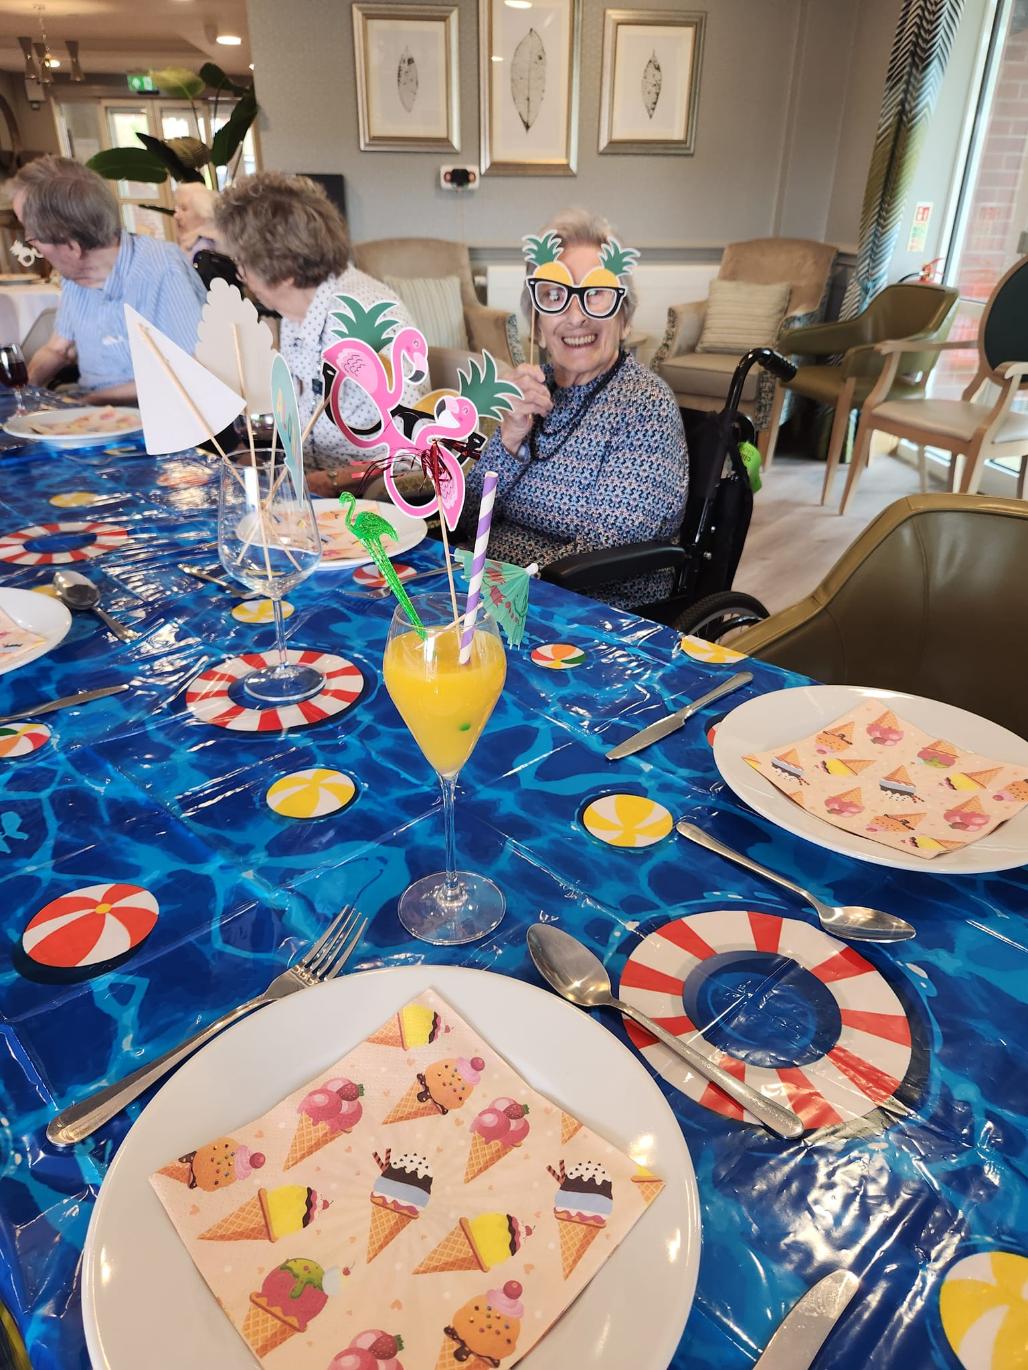 residents enjoying a meal together with accessories